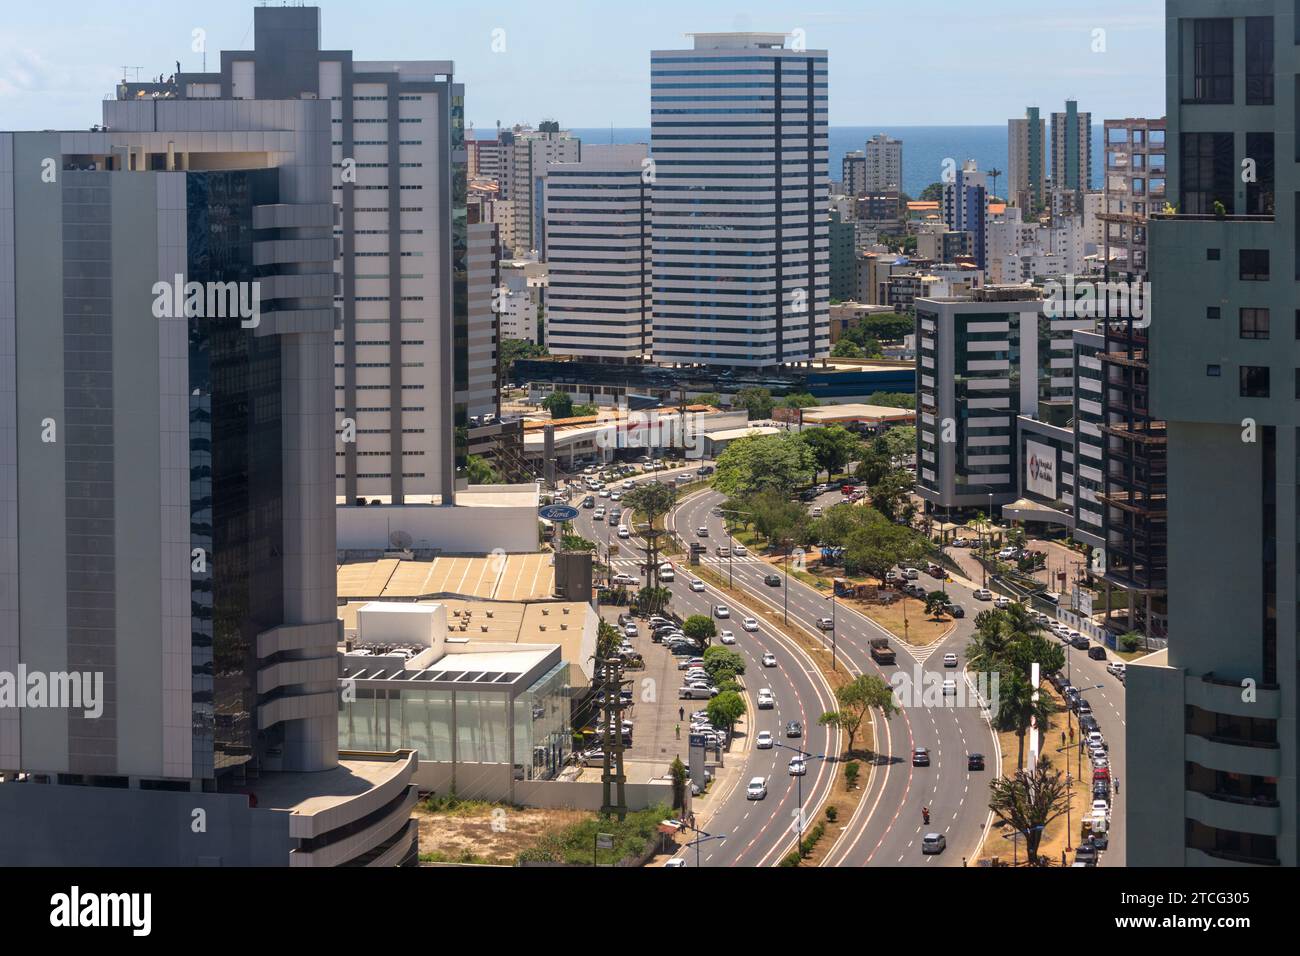 Salvador, Bahia, Brazil - February 02, 2015: View from the top of buildings on Avenida Magalhaes Neto in the city of Salvador, Bahia. Stock Photo